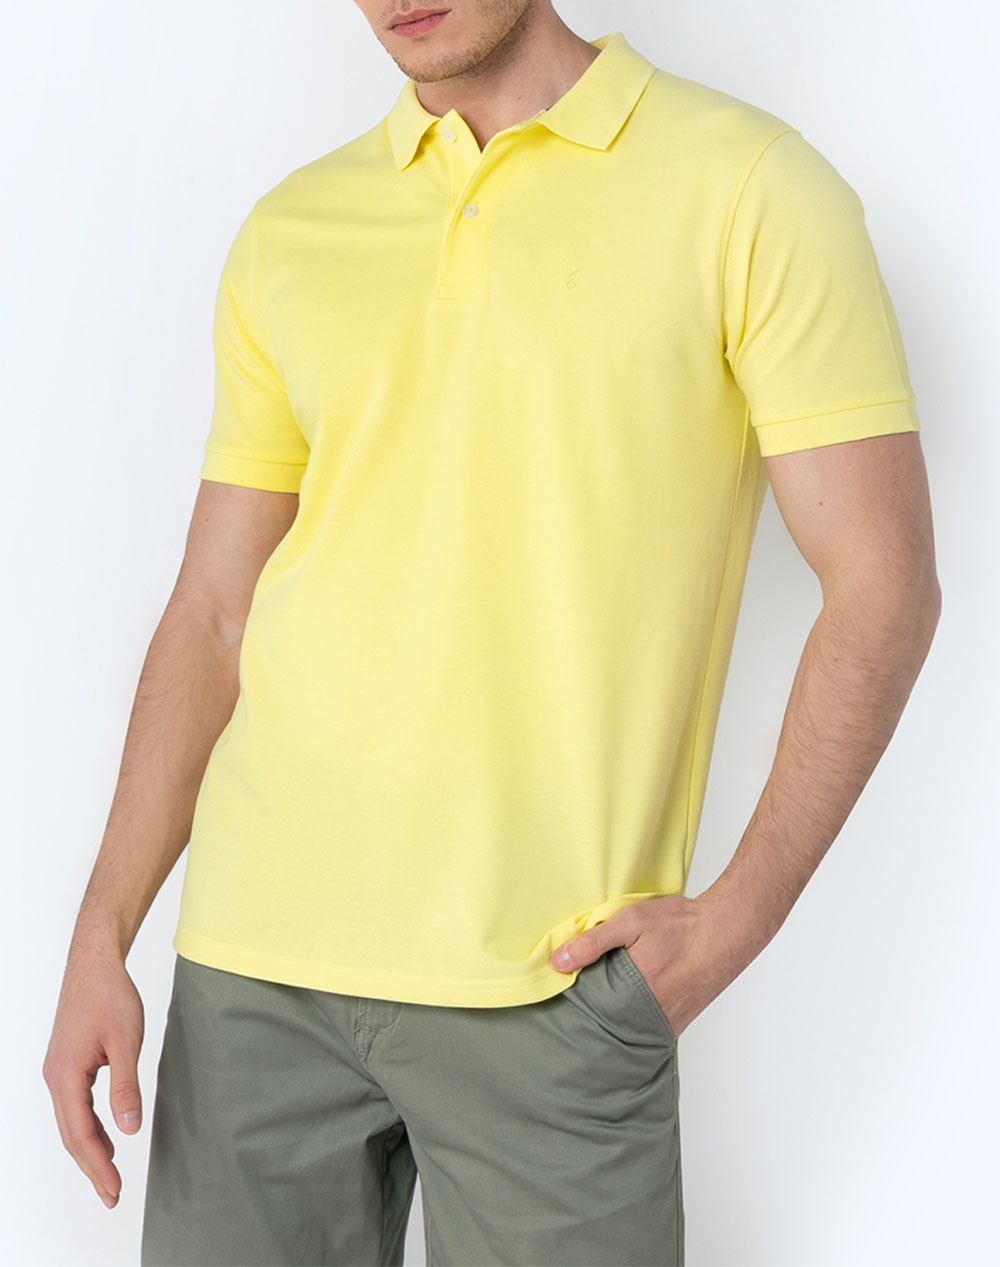 THE BOSTONIANS ΜΠΛΟΥΖΑ POLO PIQUE REGULAR FIT 3PS0001-LIGHT Yellow